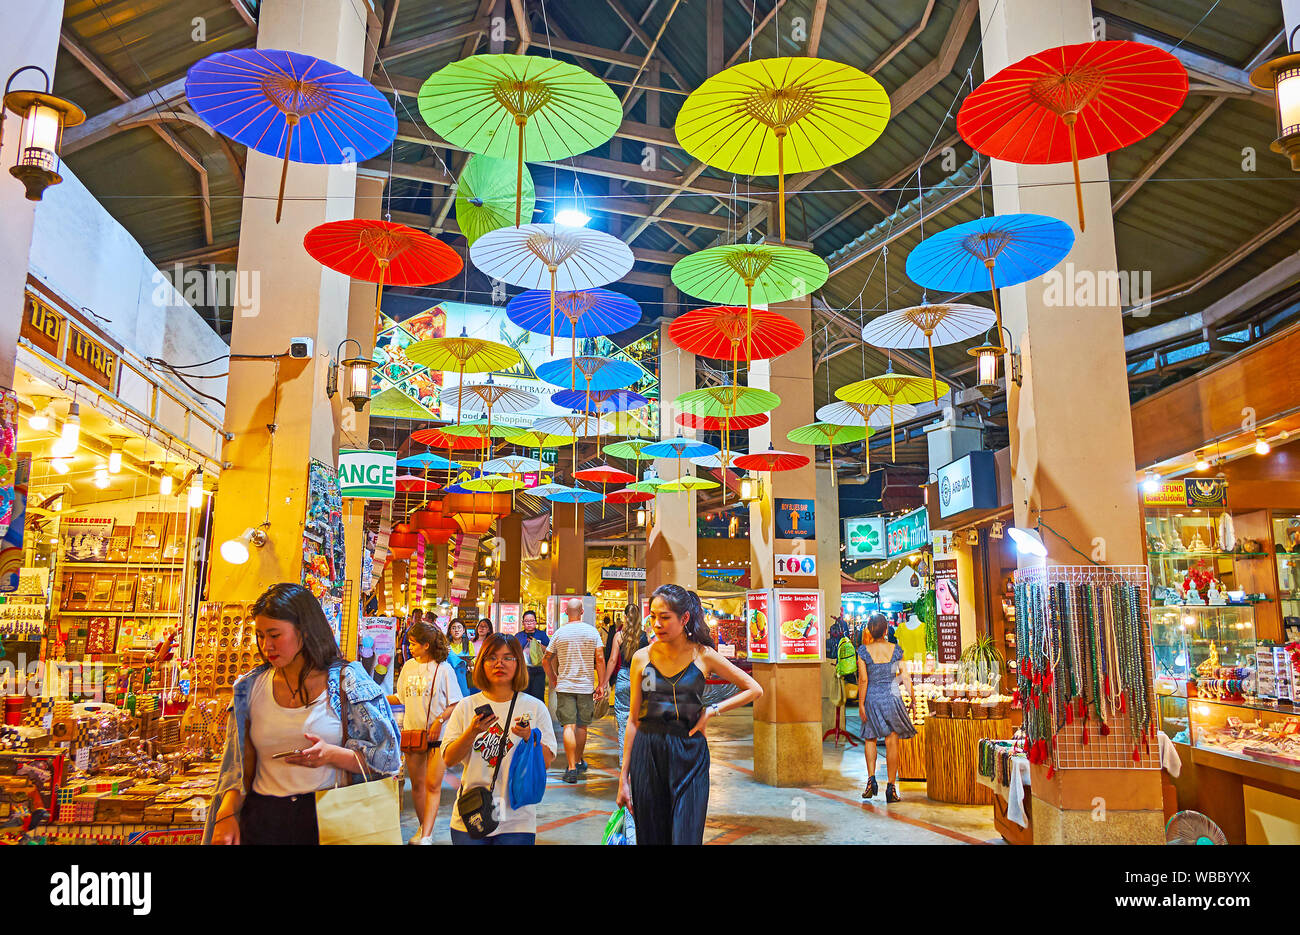 CHIANG MAI, THAILAND - MAY 2, 2019: The covered alleyway of Kalare Night Market is decorated with  colored Oriental umbrellas, hanging from the ceilin Stock Photo